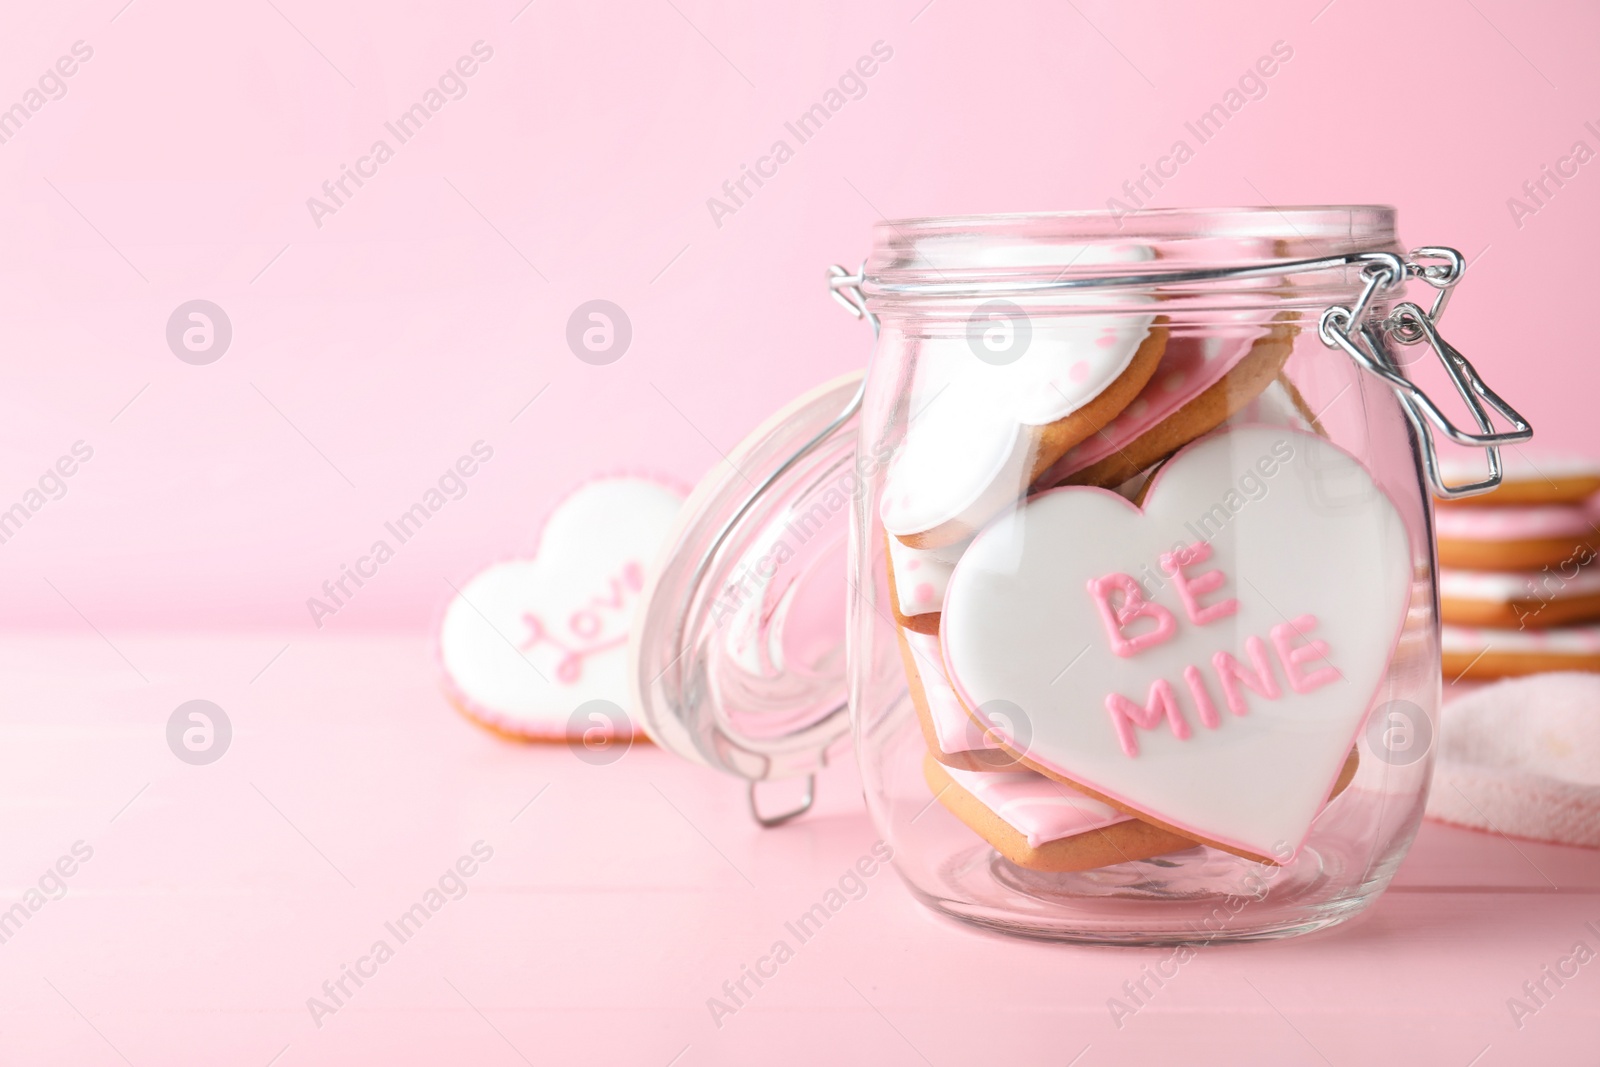 Photo of Heart shaped cookies in glass jar on pink background, space for text. Valentine's day treat